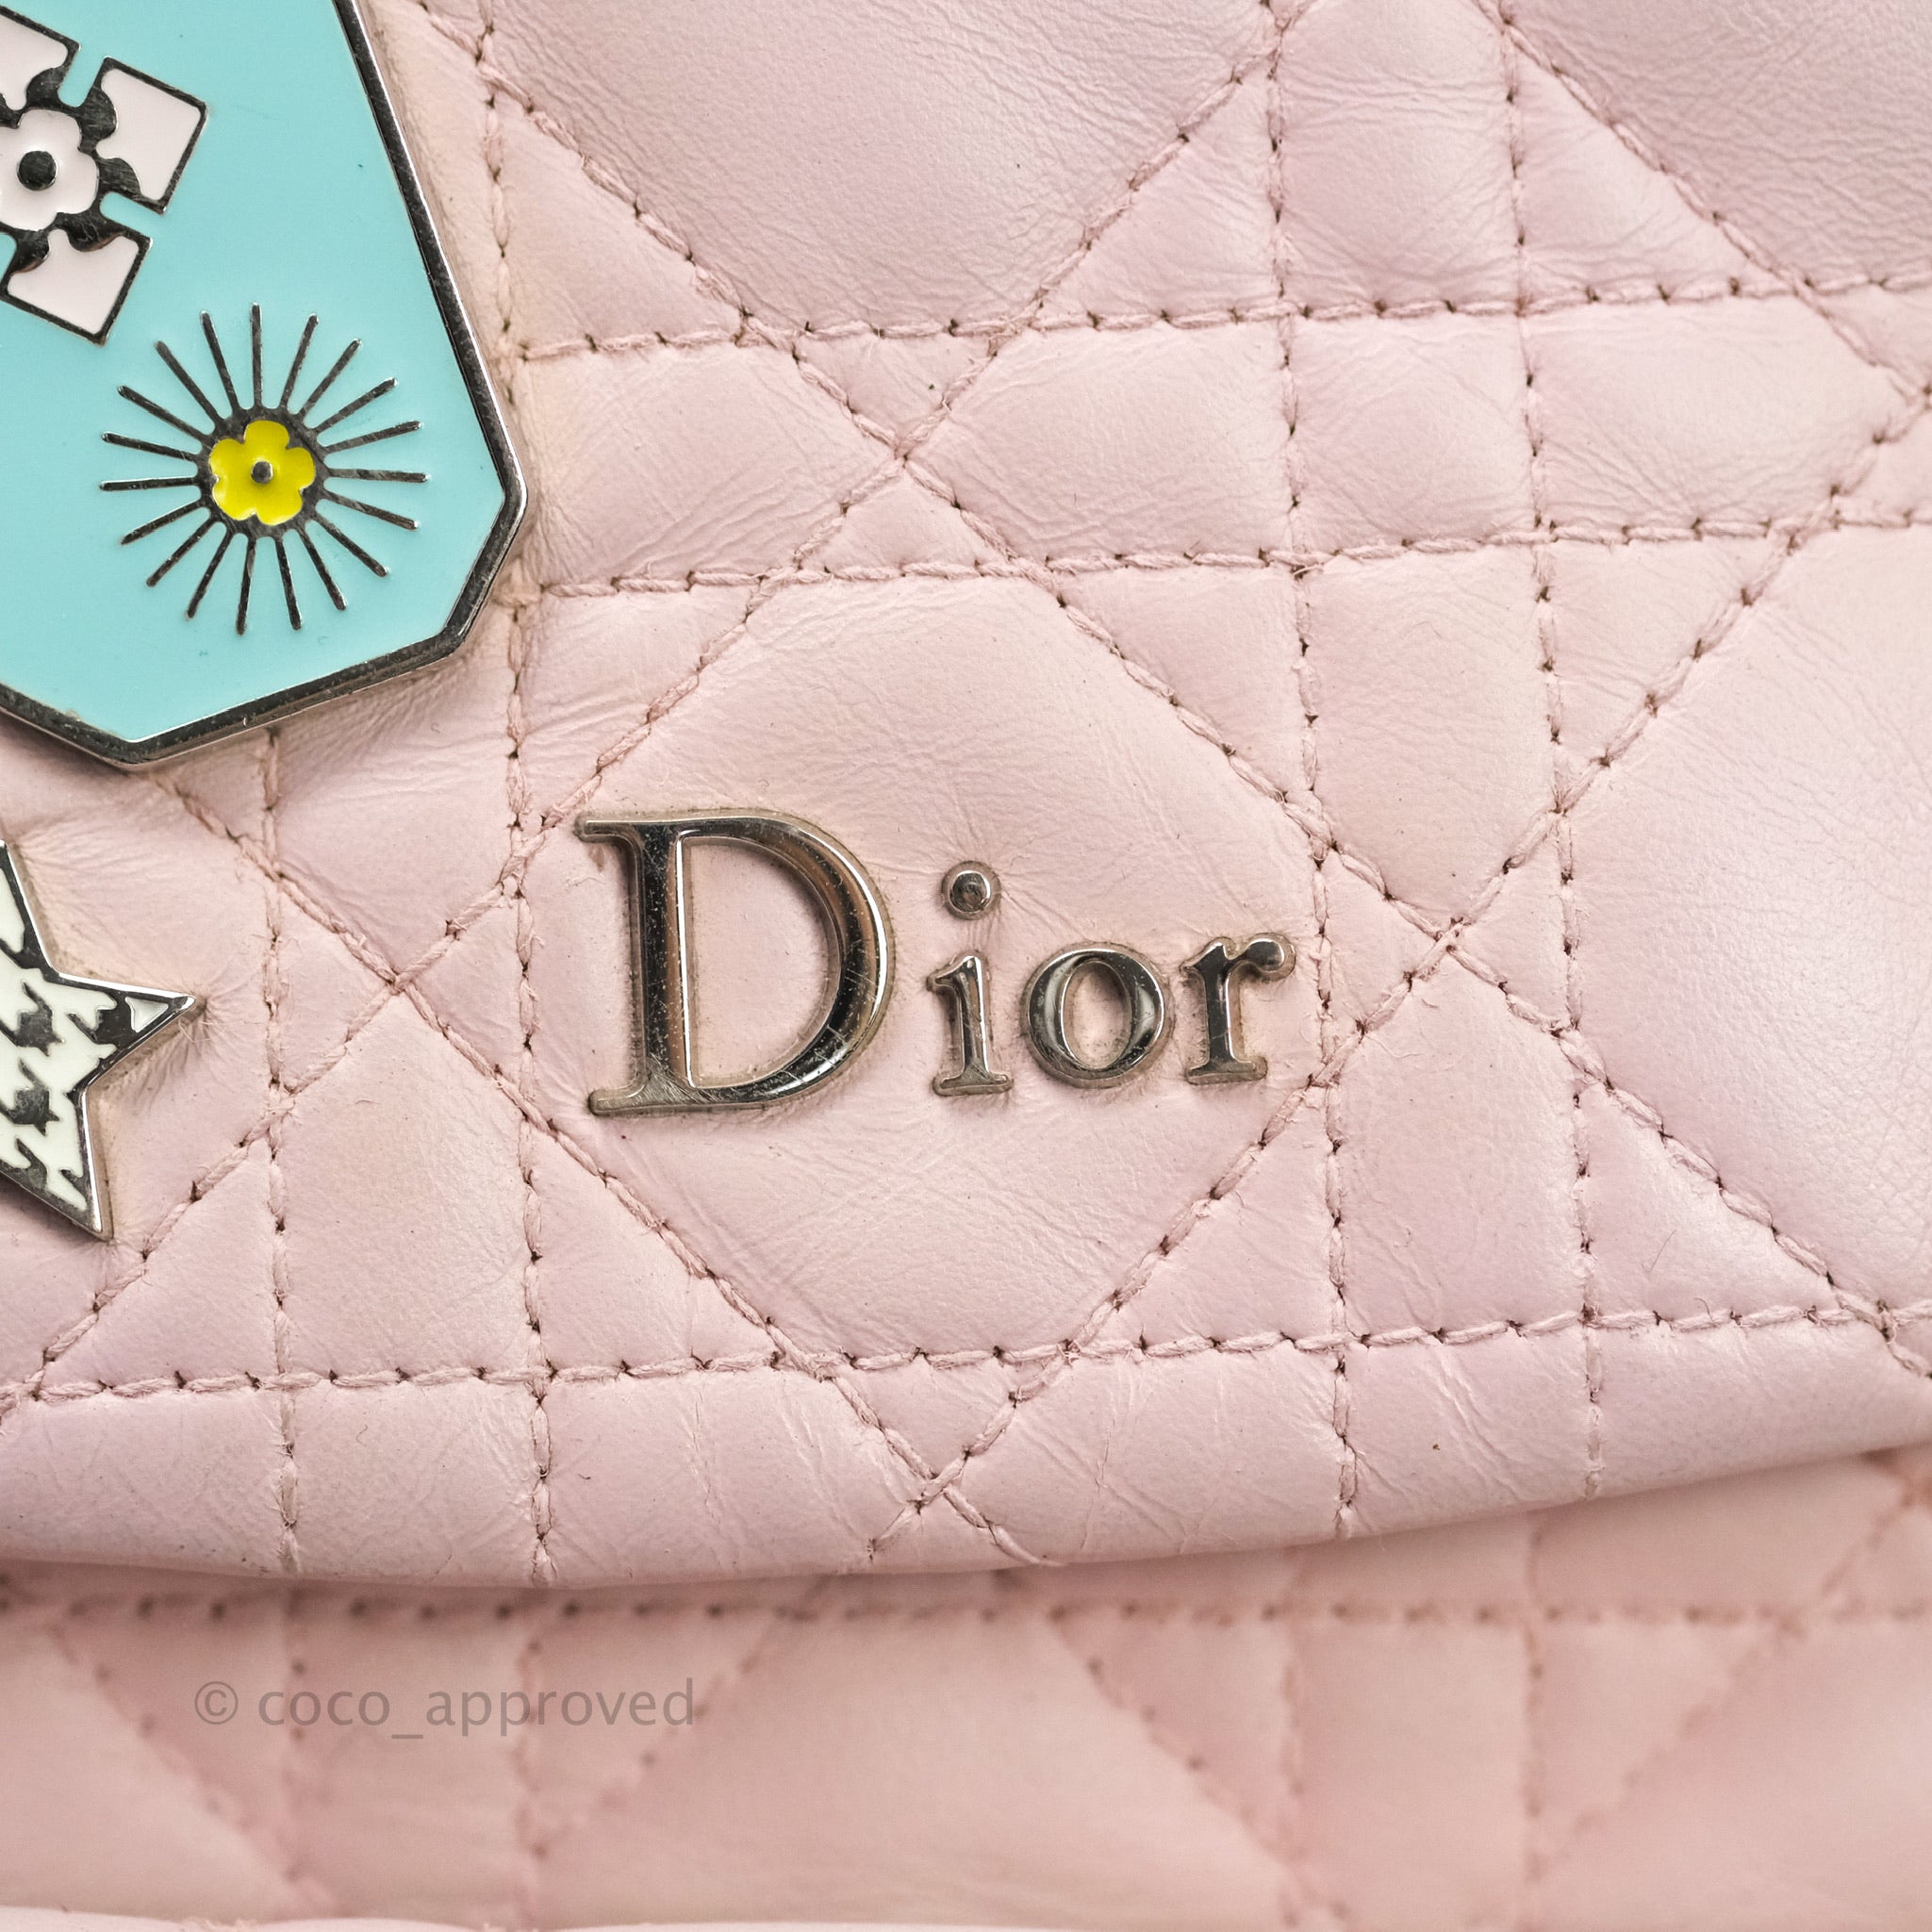 Dior Beige/Pink Canvas and Leather Nappy Diaper Bag Dior